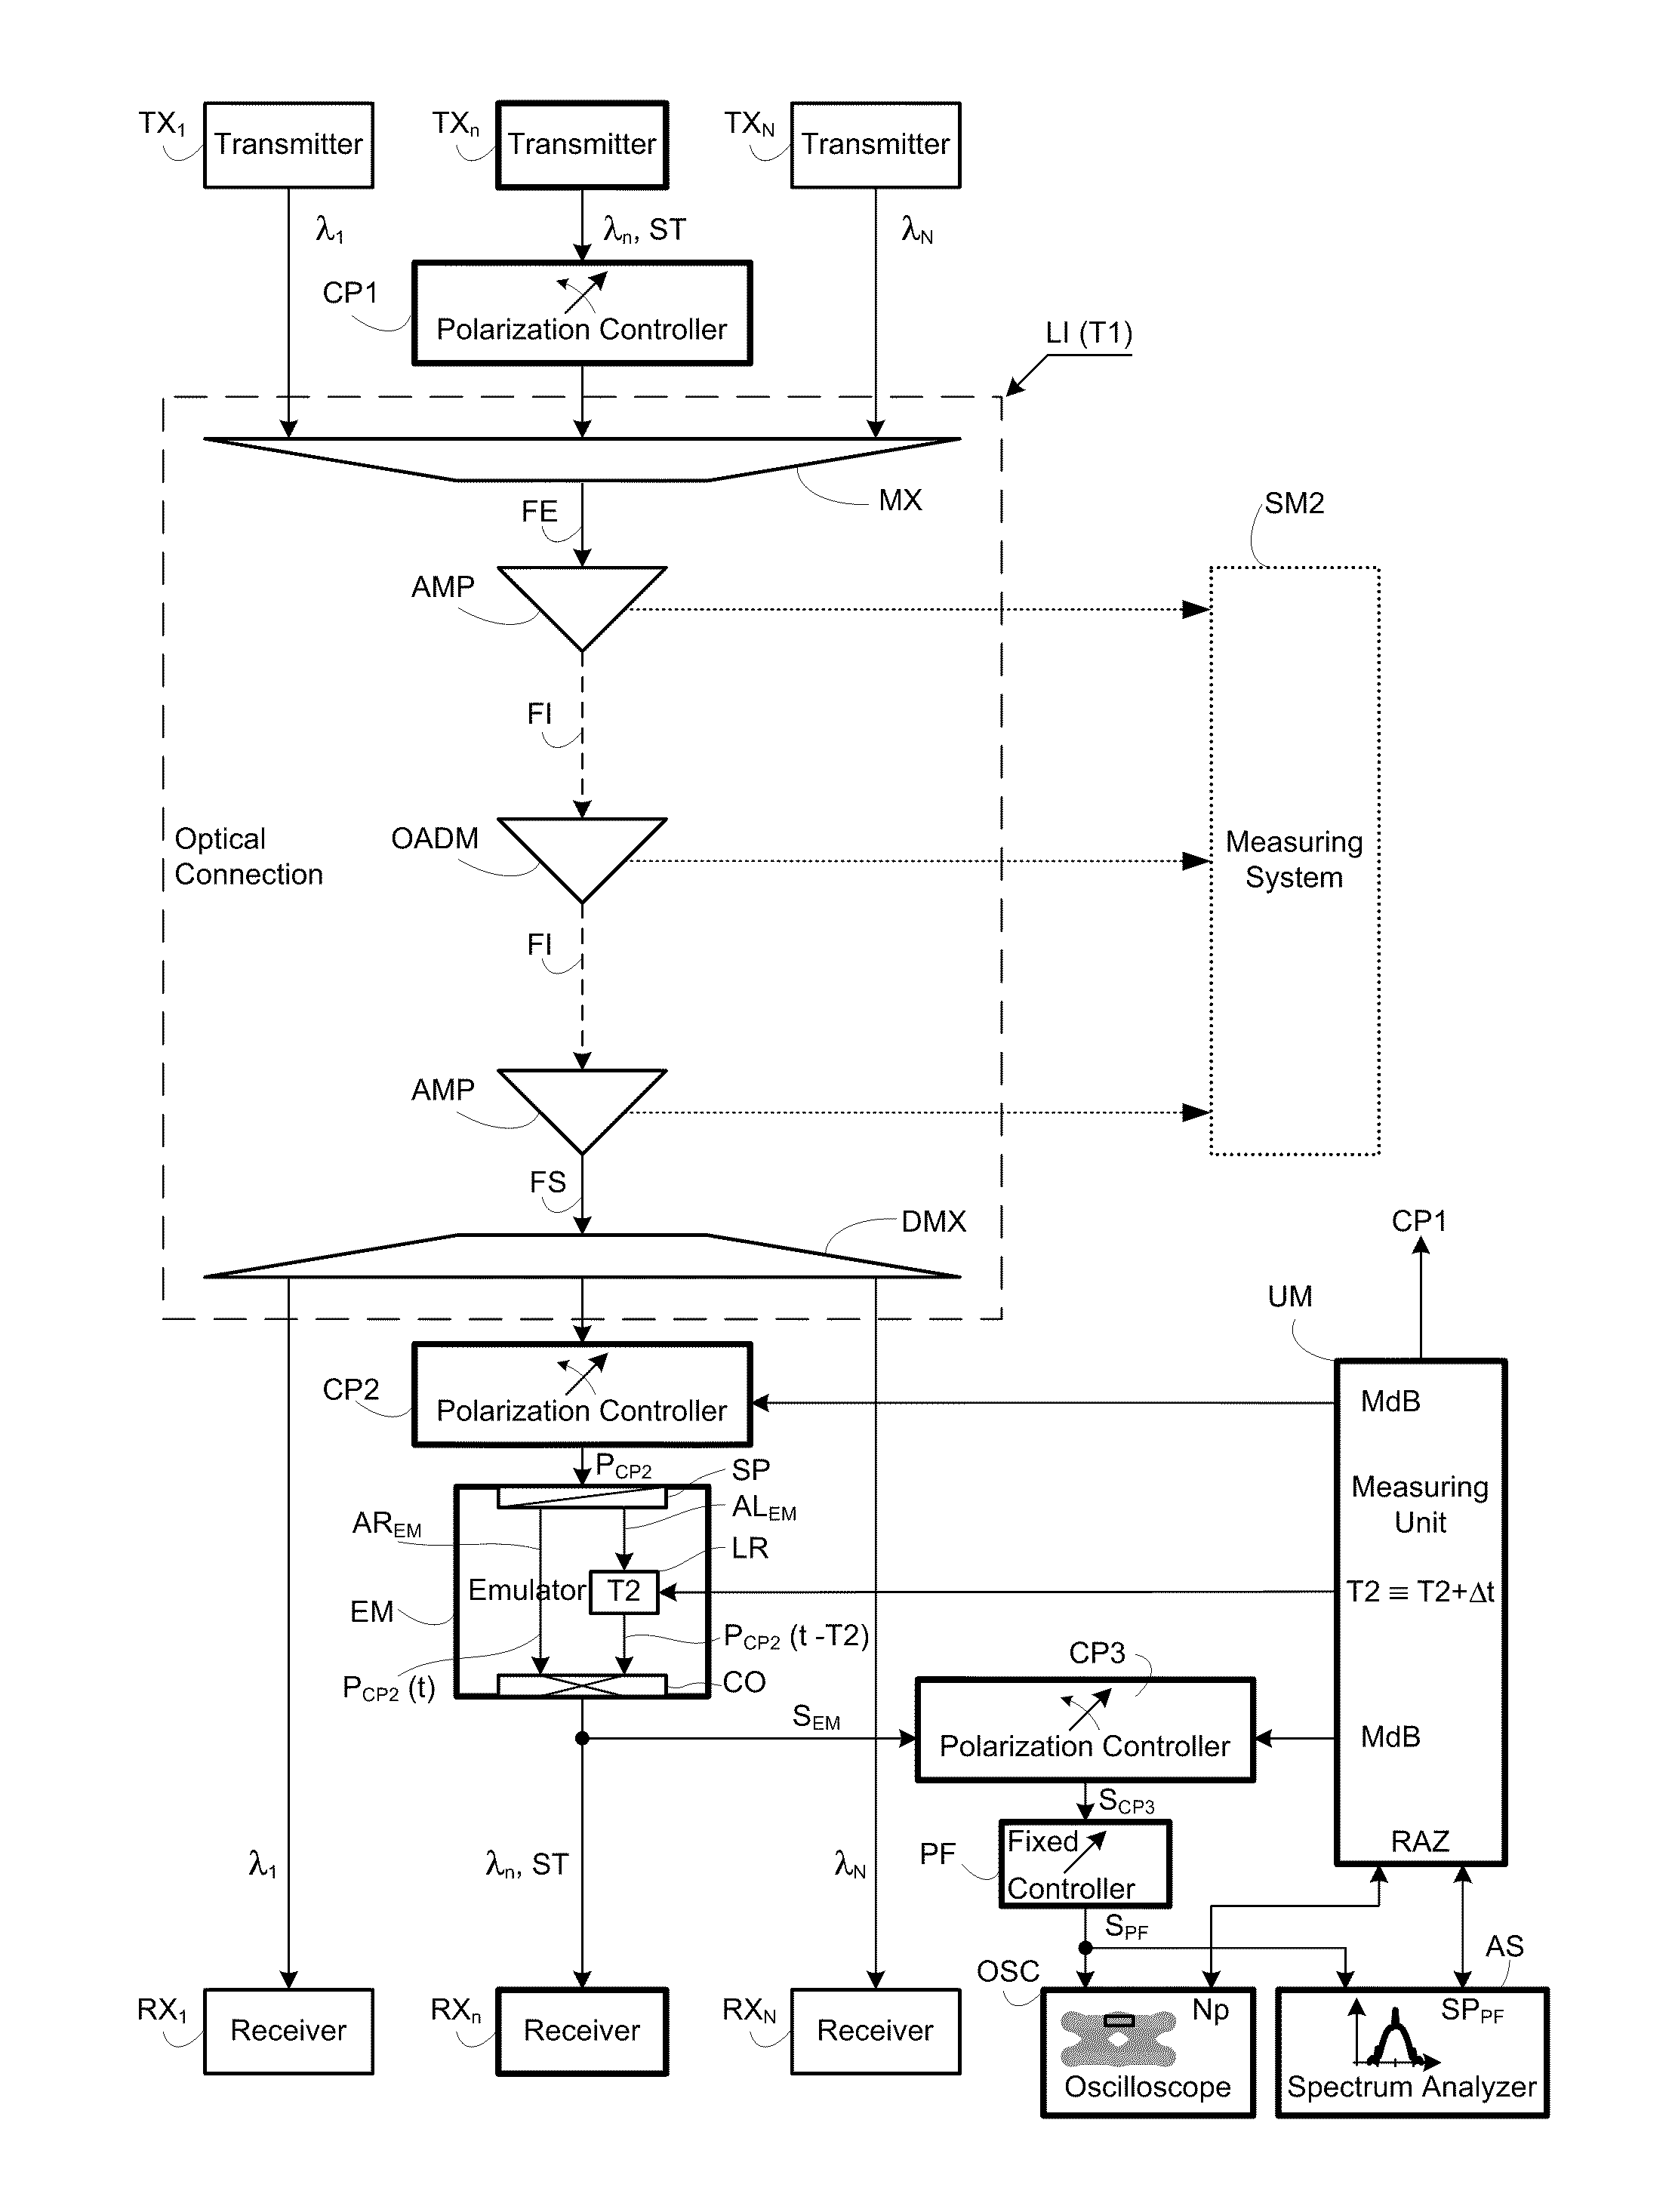 Measuring differential group delay in an optical fiber connection